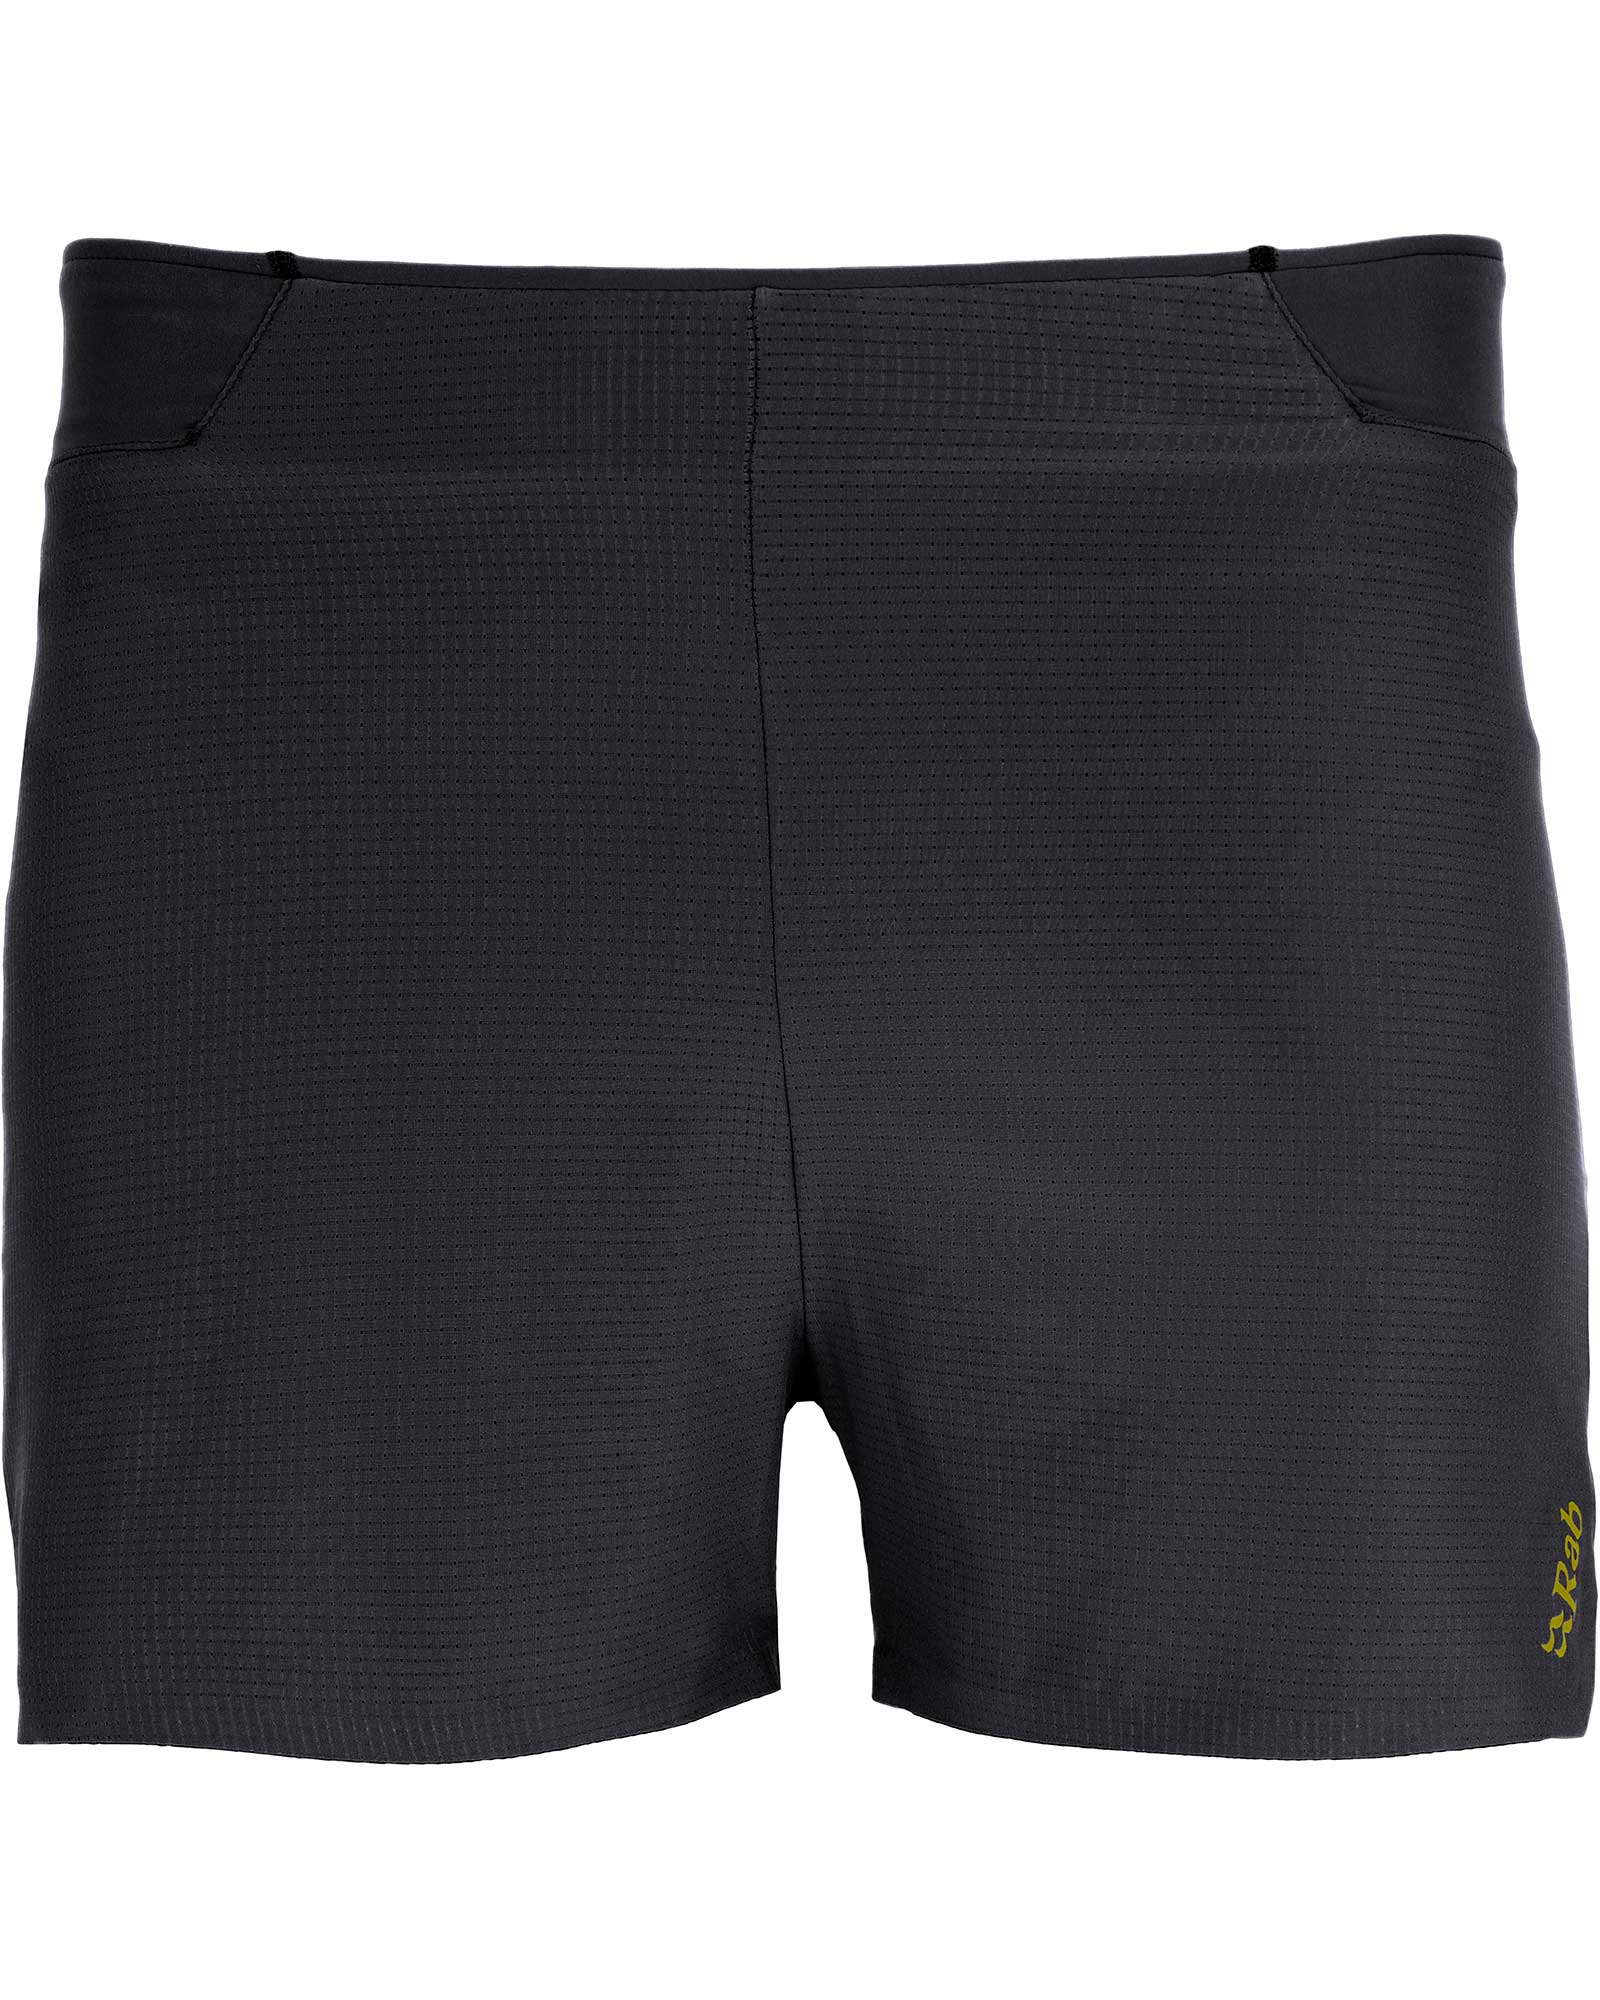 Product image of Rab Talus Ultra Men's Shorts